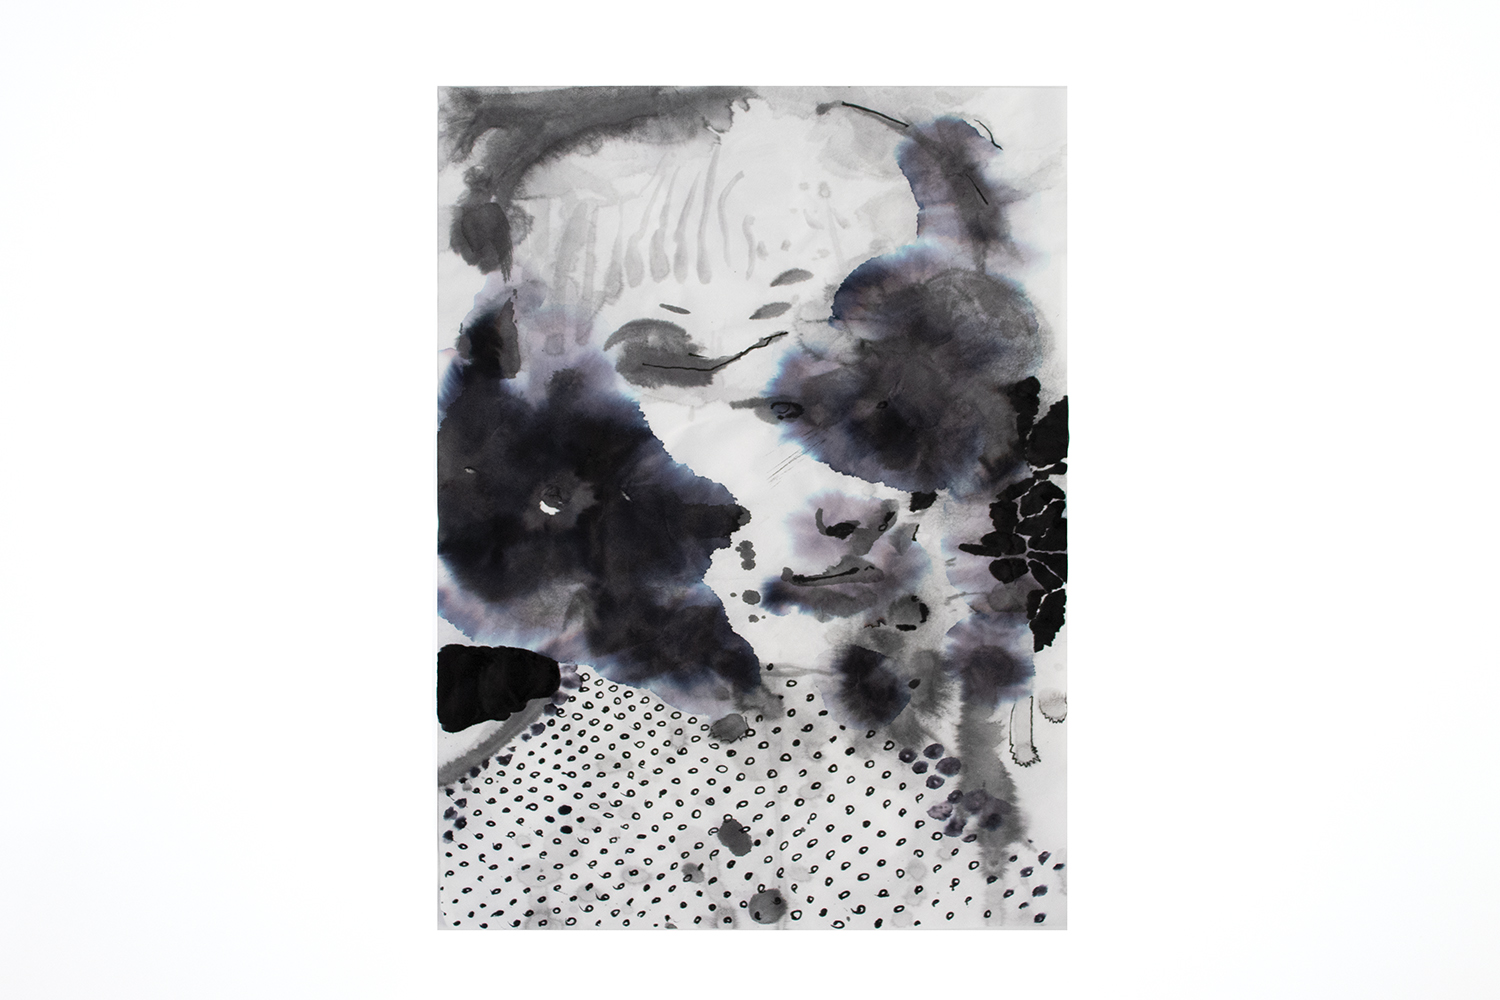 Splashes 01, Sumi-ink on rice paper, part of a painting series, 33x24 cm (13x9.5 inches), 2020